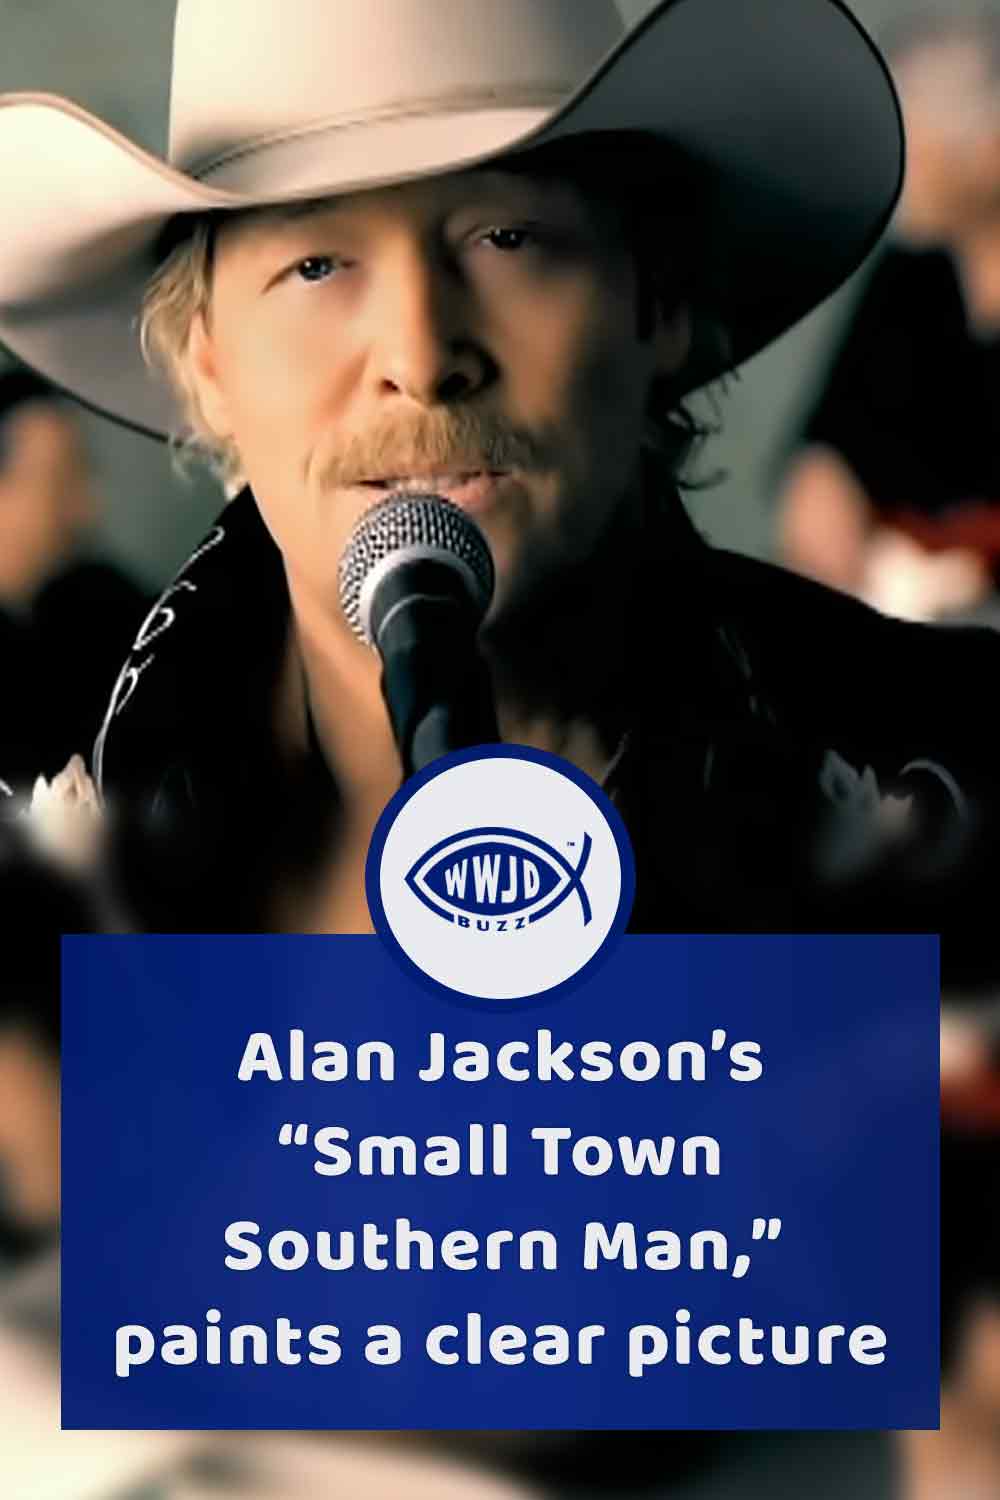 Alan Jackson’s “Small Town Southern Man,” paints a clear picture